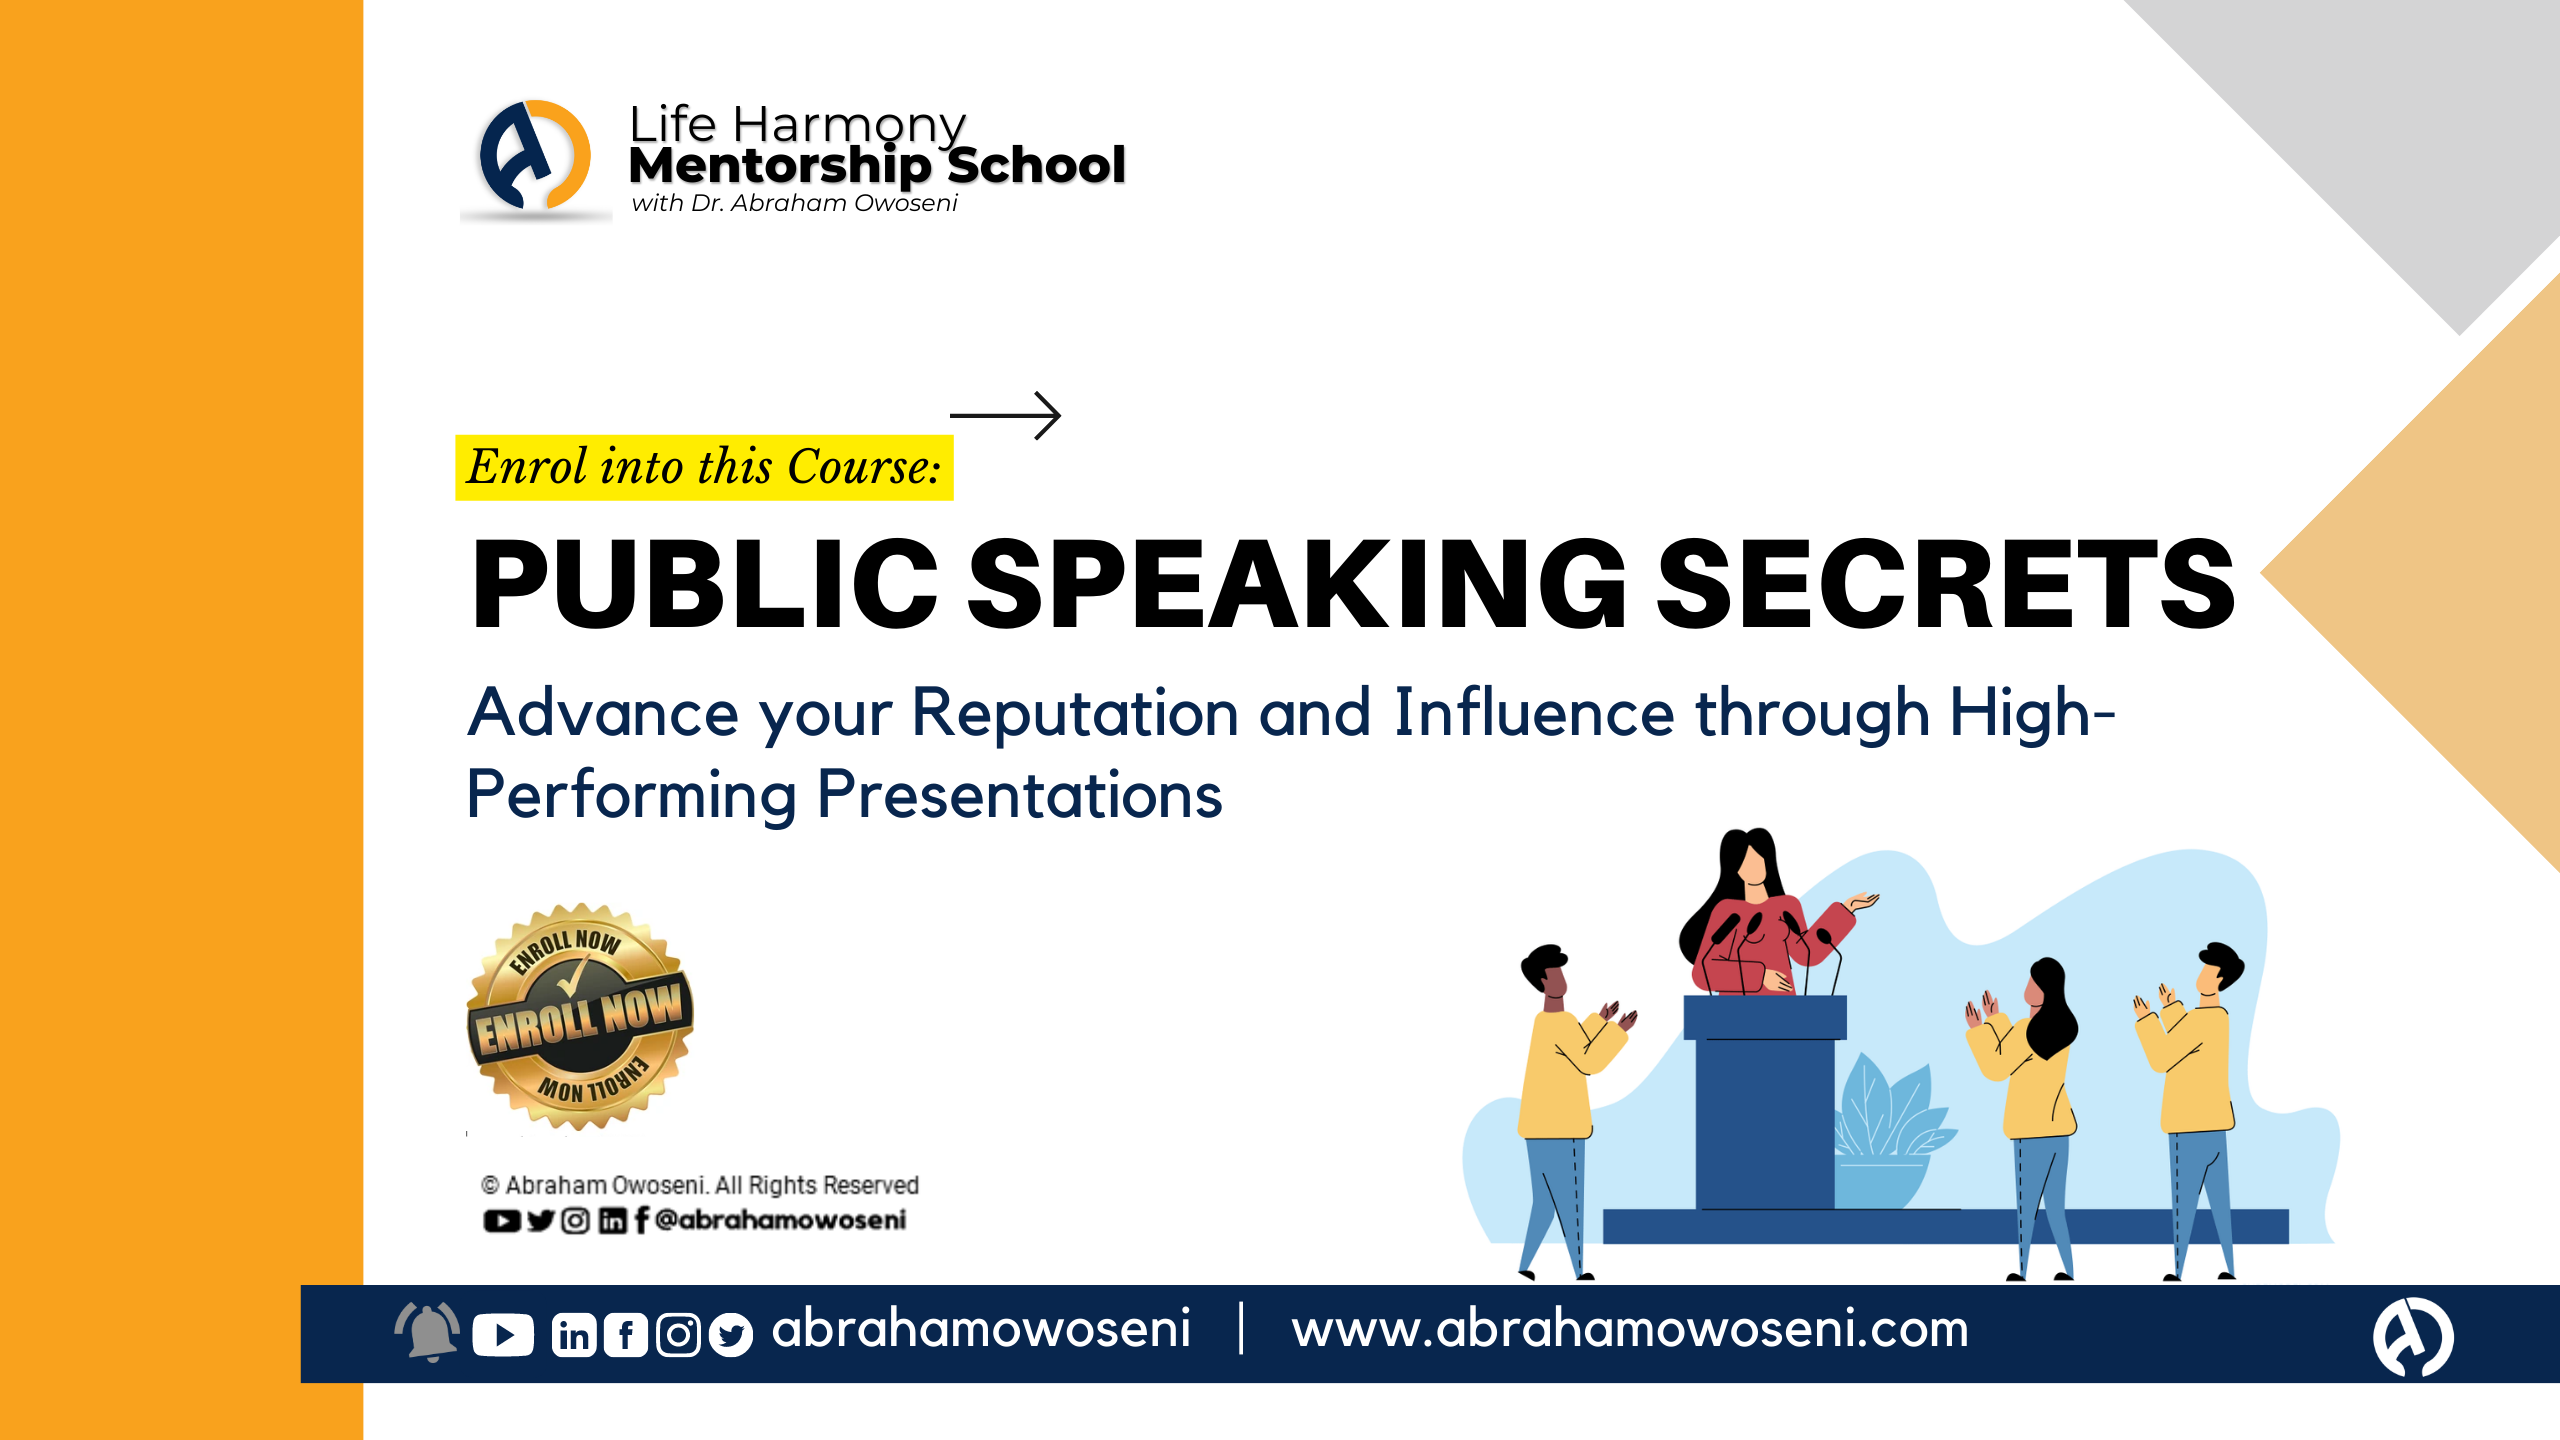 Public Speaking Secrets: How to Advance your Reputation and Influence through High-Performing Presentations